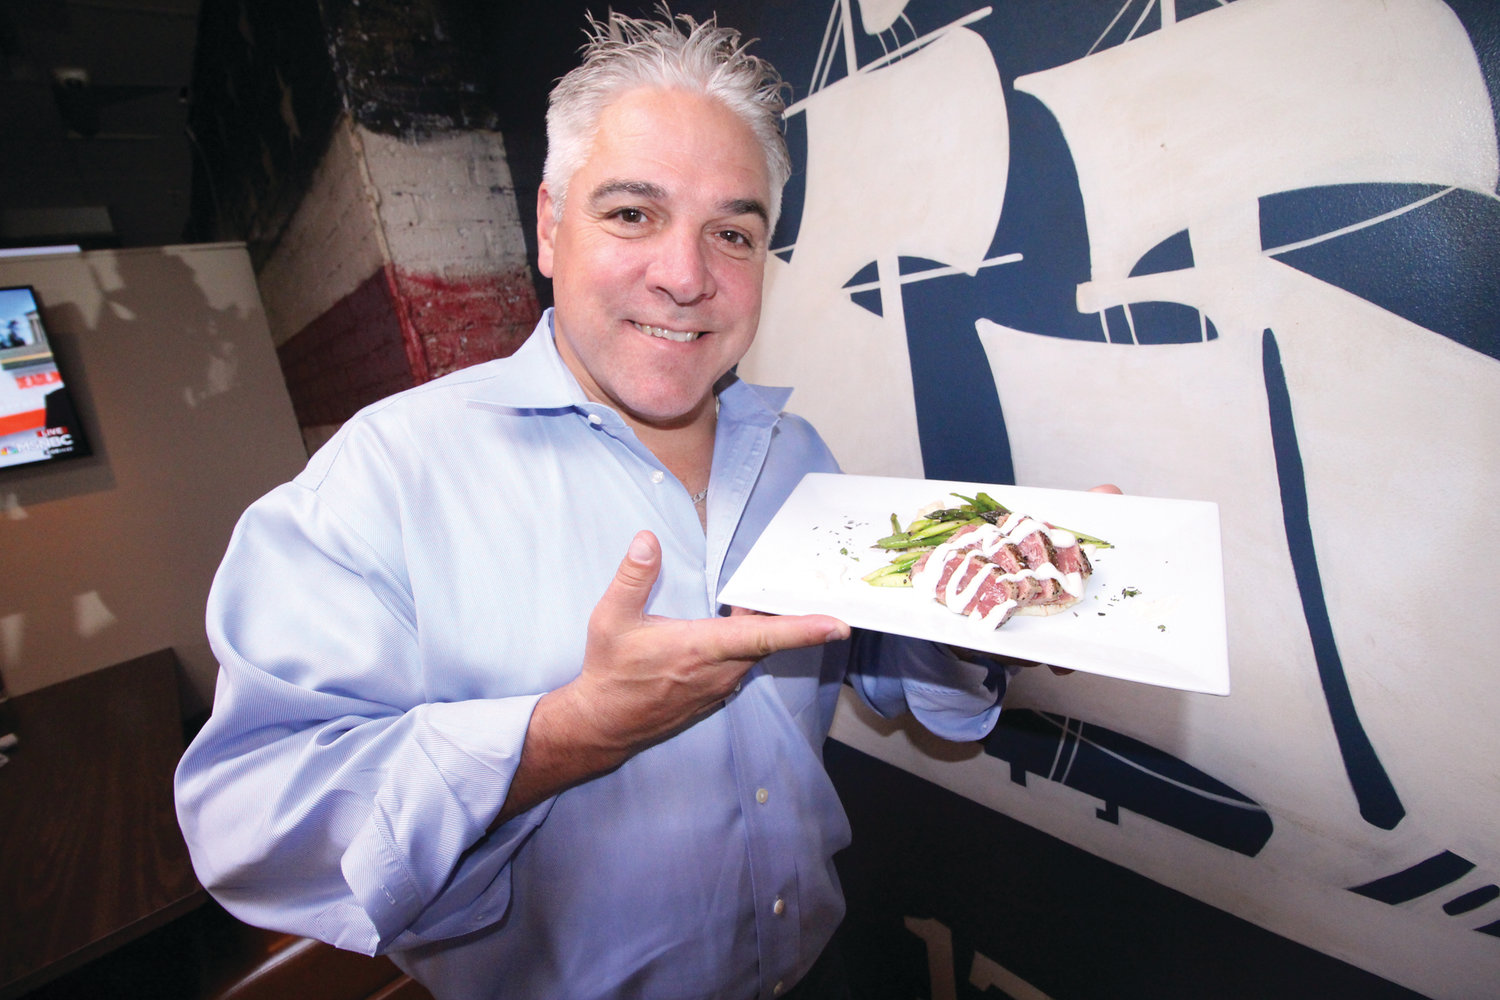 WHAT’S PLANNED AT REVOLUTION: When Dean Scanlon was asked what he planned to serve for the Taste of Pawtuxet, he escorted us to the kitchen where in a matter of minutes he prepared the “mini” steak dinner with asparagus  and a dollop of mashed potatoes he’ll be offering.